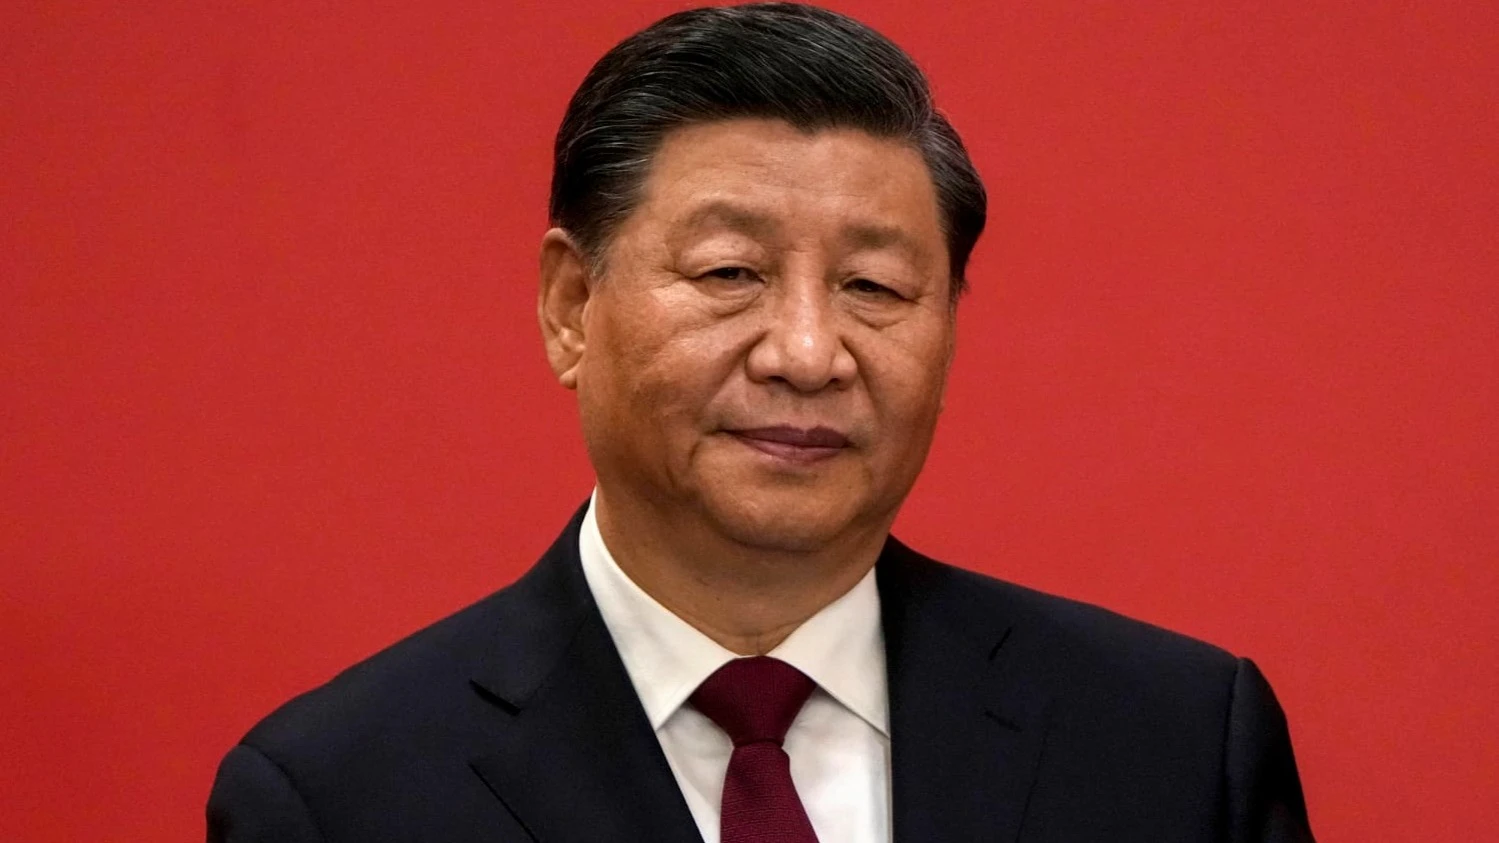 Xi Jinping, general secretary of the Communist Party of China (CPC).